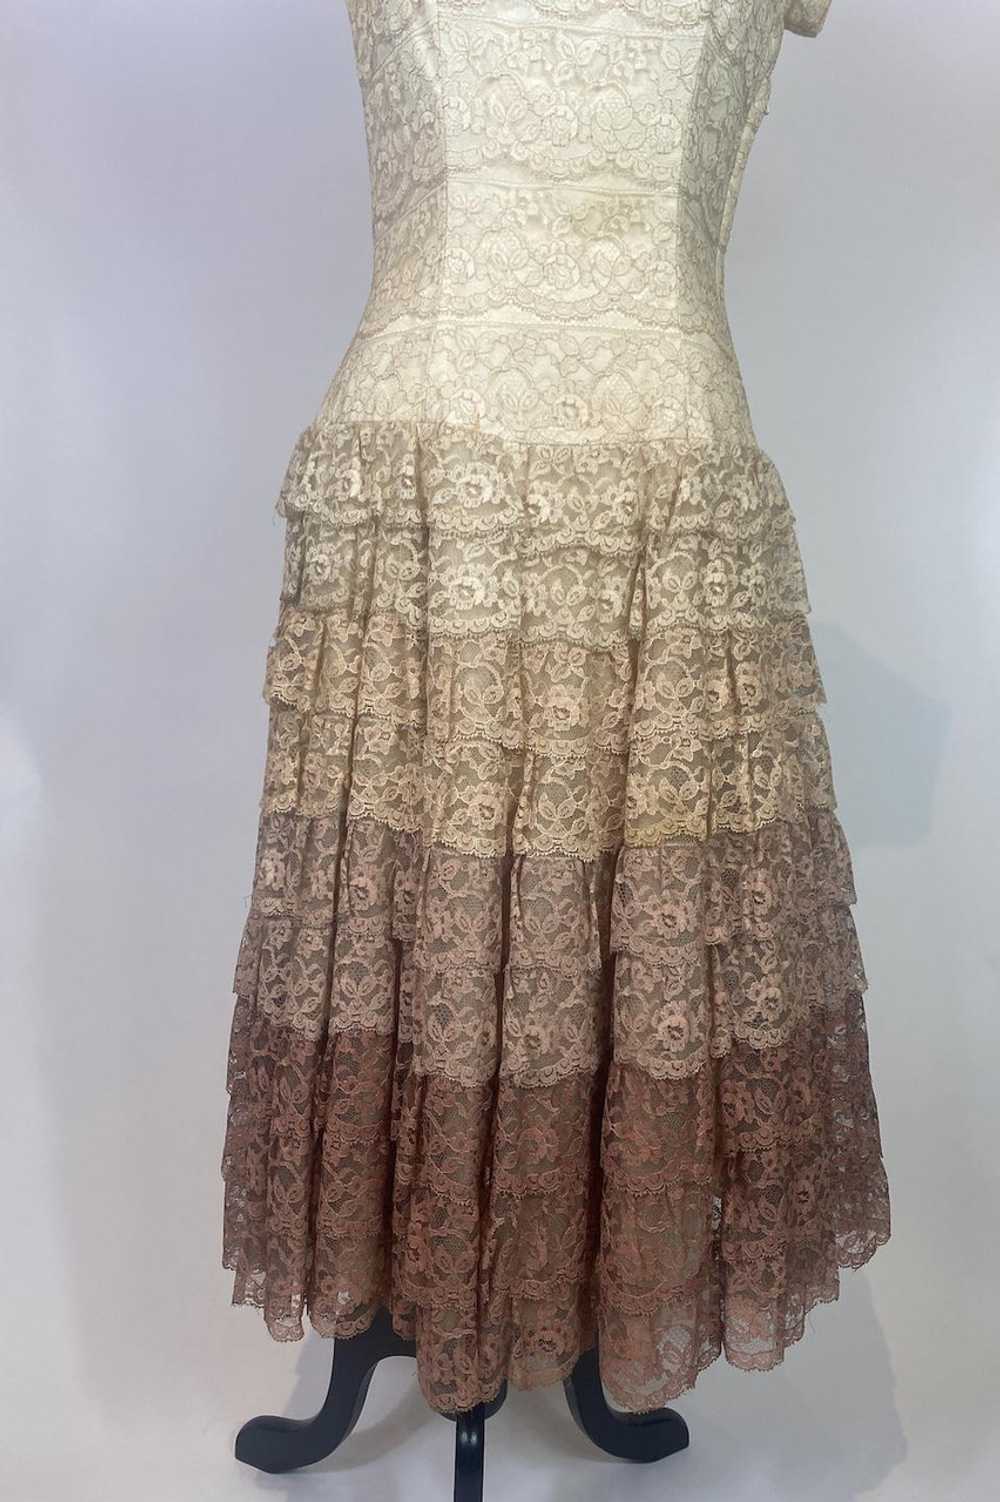 1950s Tiered Ombre Lace Swing Dress - image 3